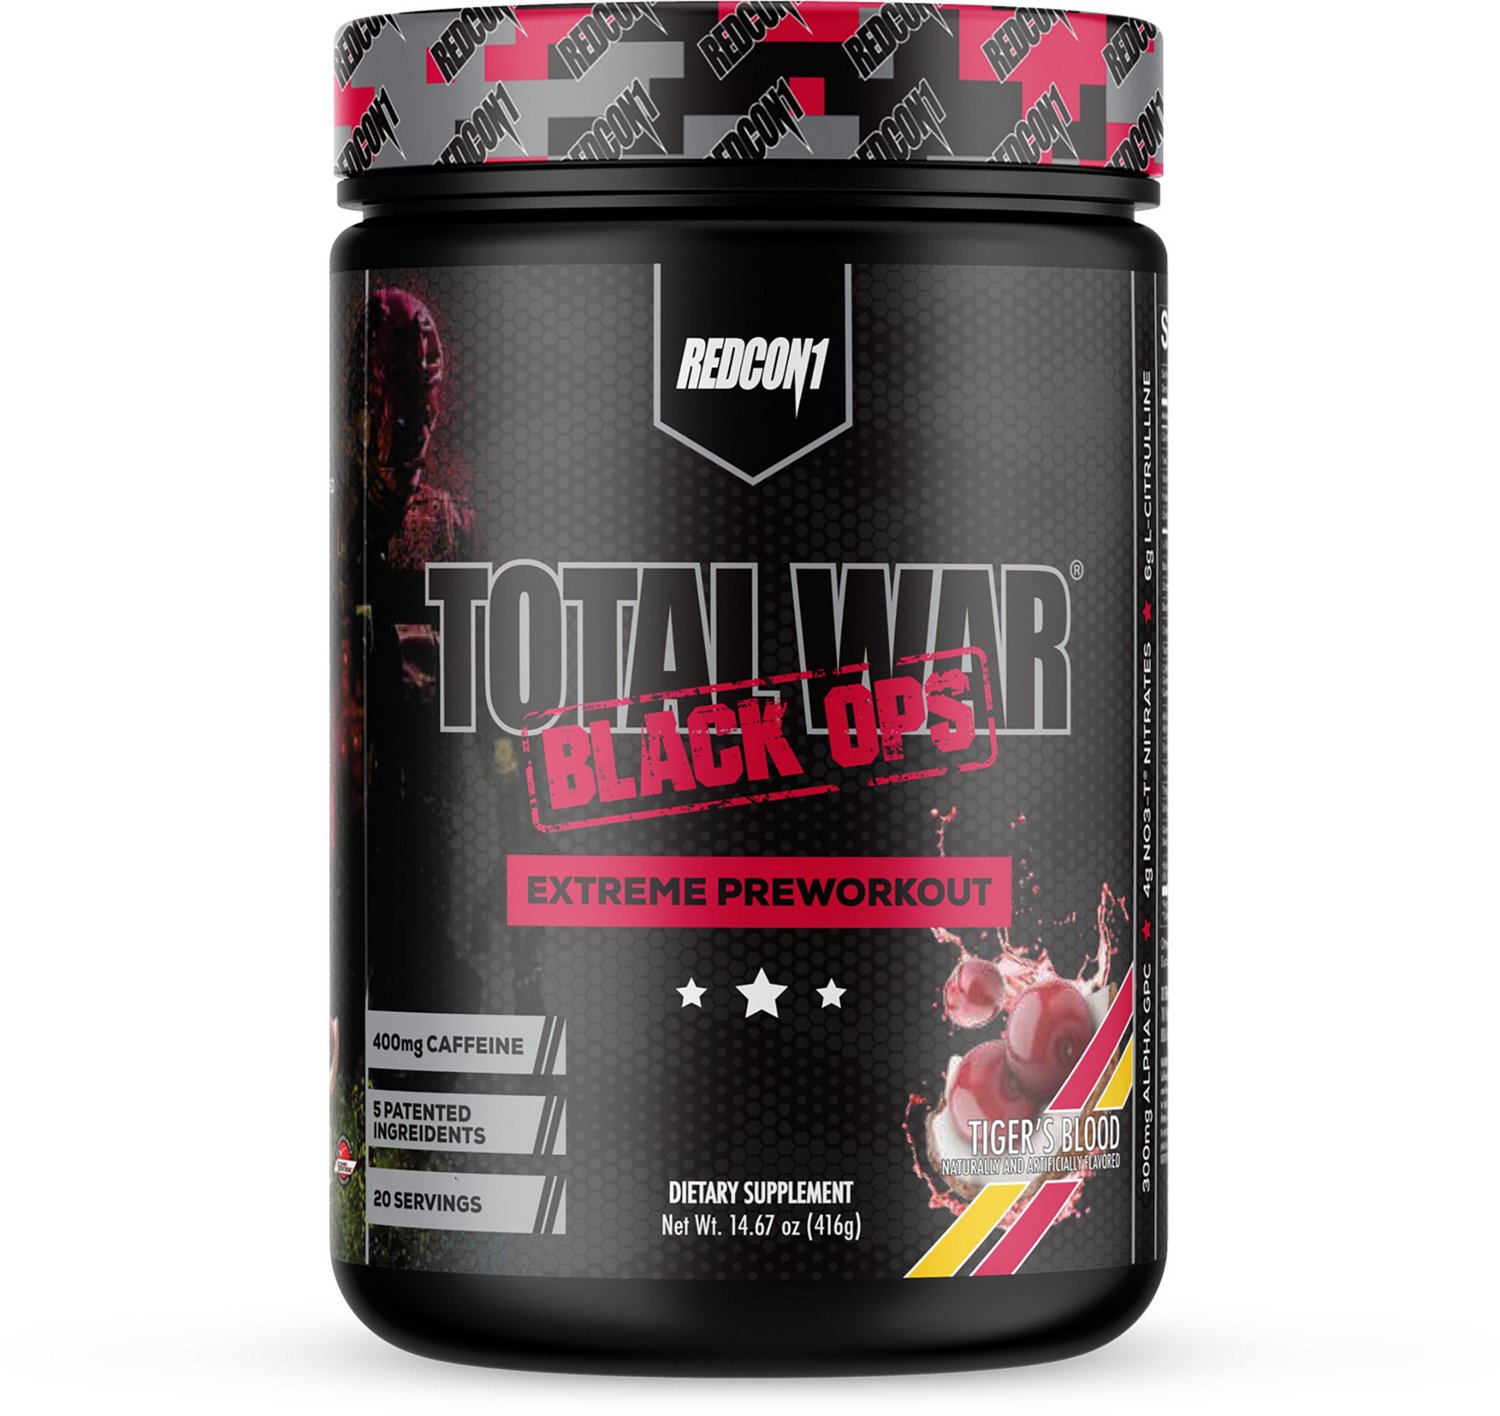 Redcon1 Total War Black Ops Tigers Blood Pre Workout Supplement                                                                  - view number 1 selected